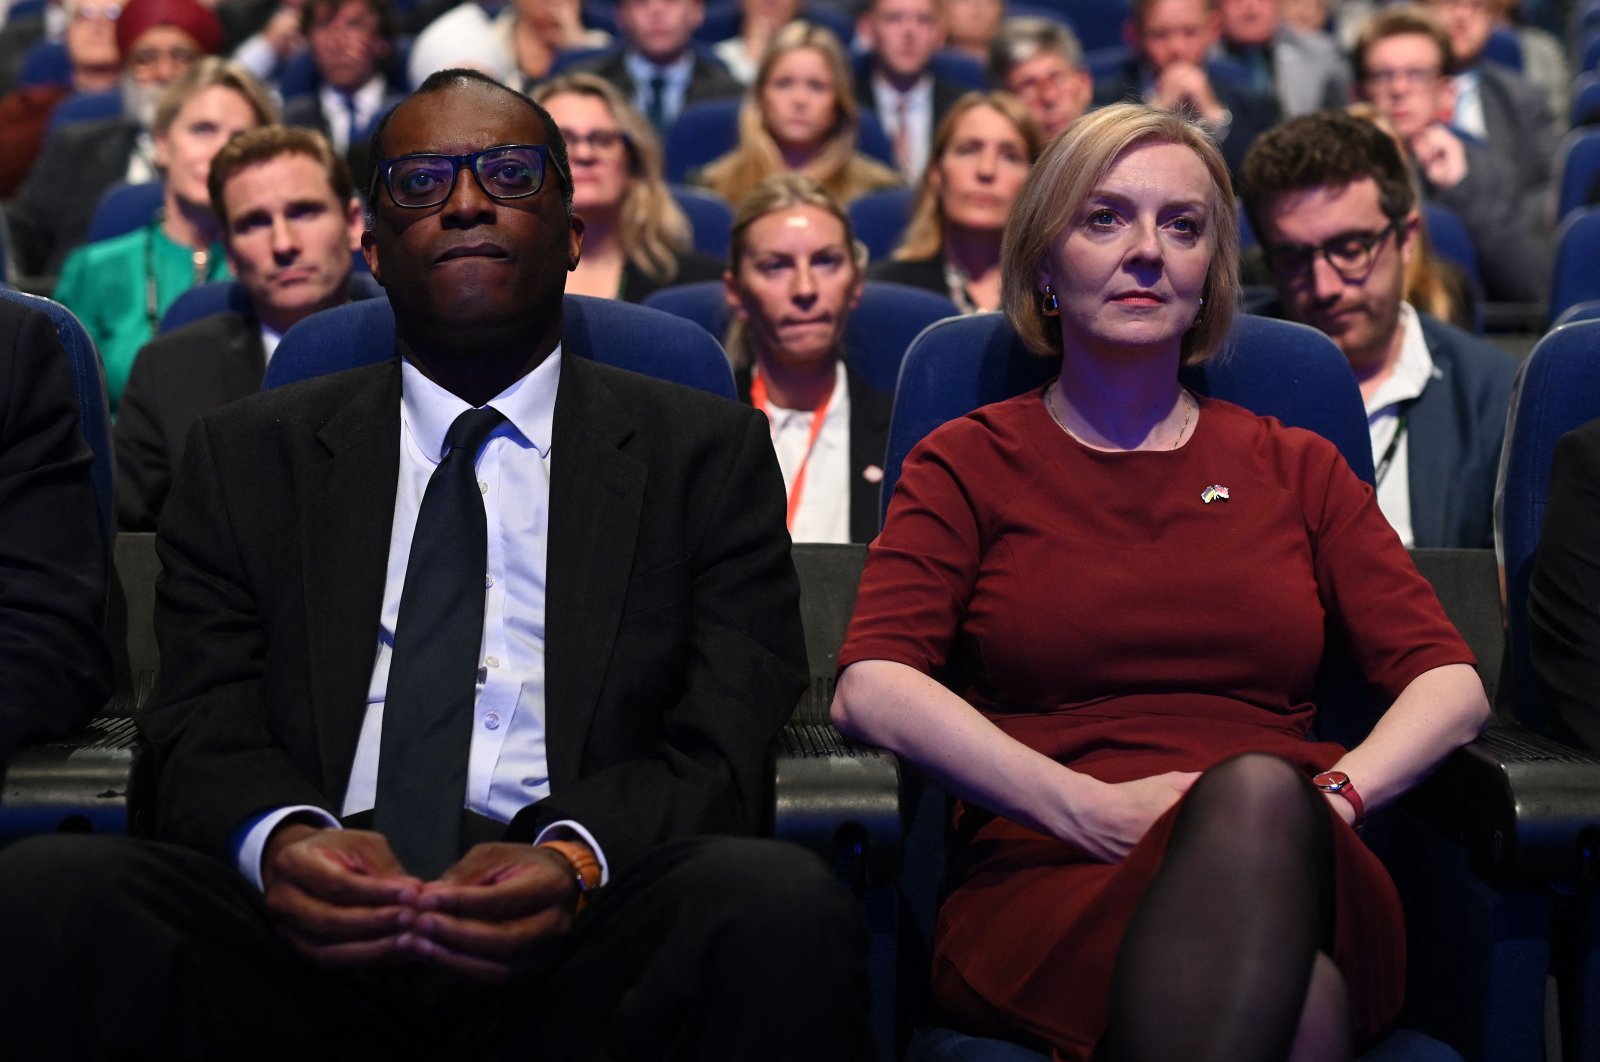 British Chancellor of the Exchequer Kwasi Kwarteng (L) and British Prime Minister Liz Truss attend the Conservative Party annual conference at the International Convention Center in Birmingham, central Britain, Oct. 2, 2022. (AP Photo)